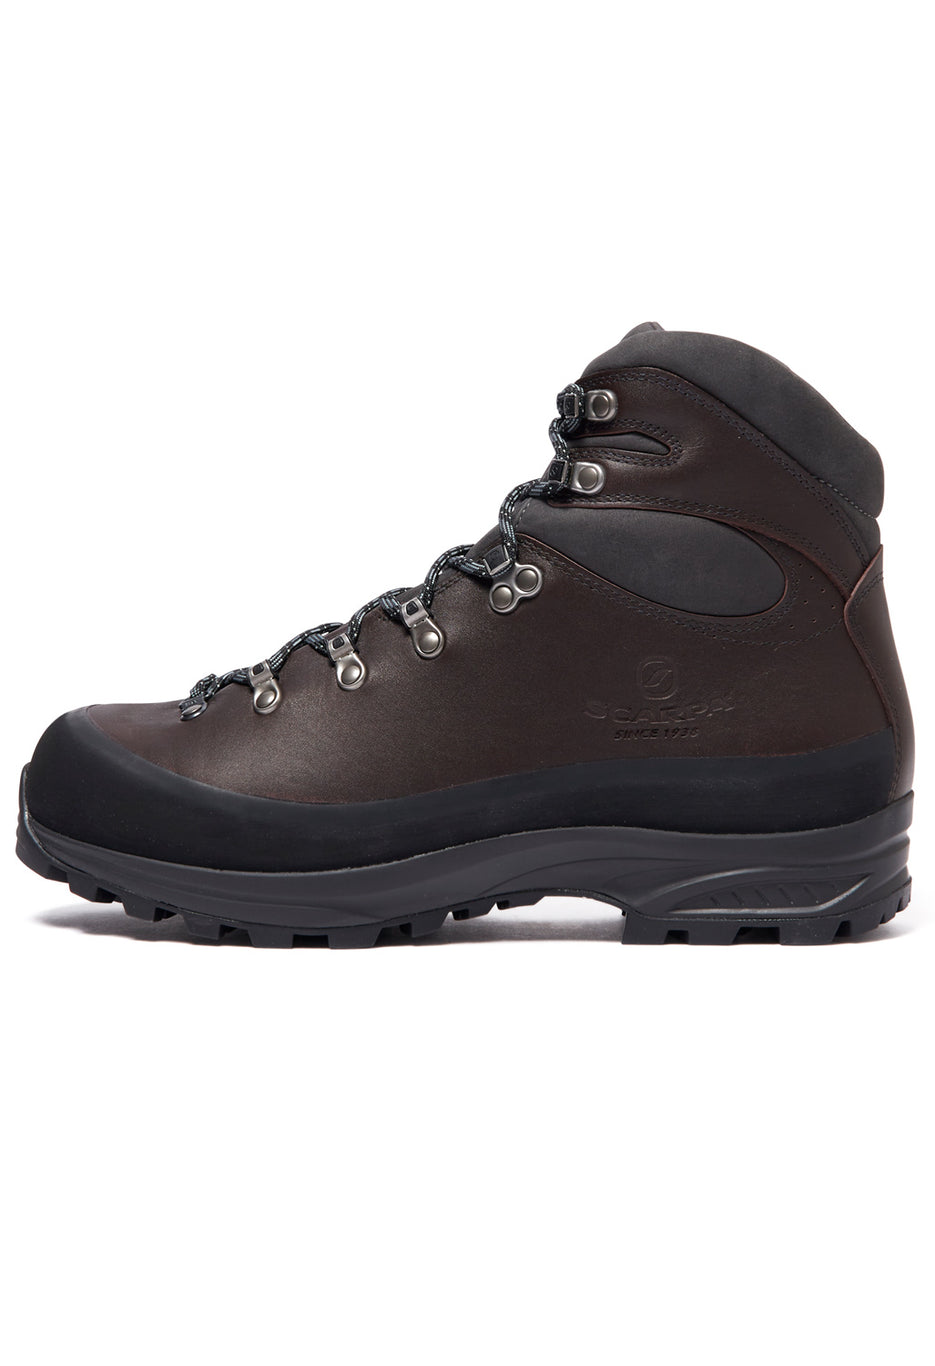 Men's Boots - Outsiders Store – Outsiders Store UK